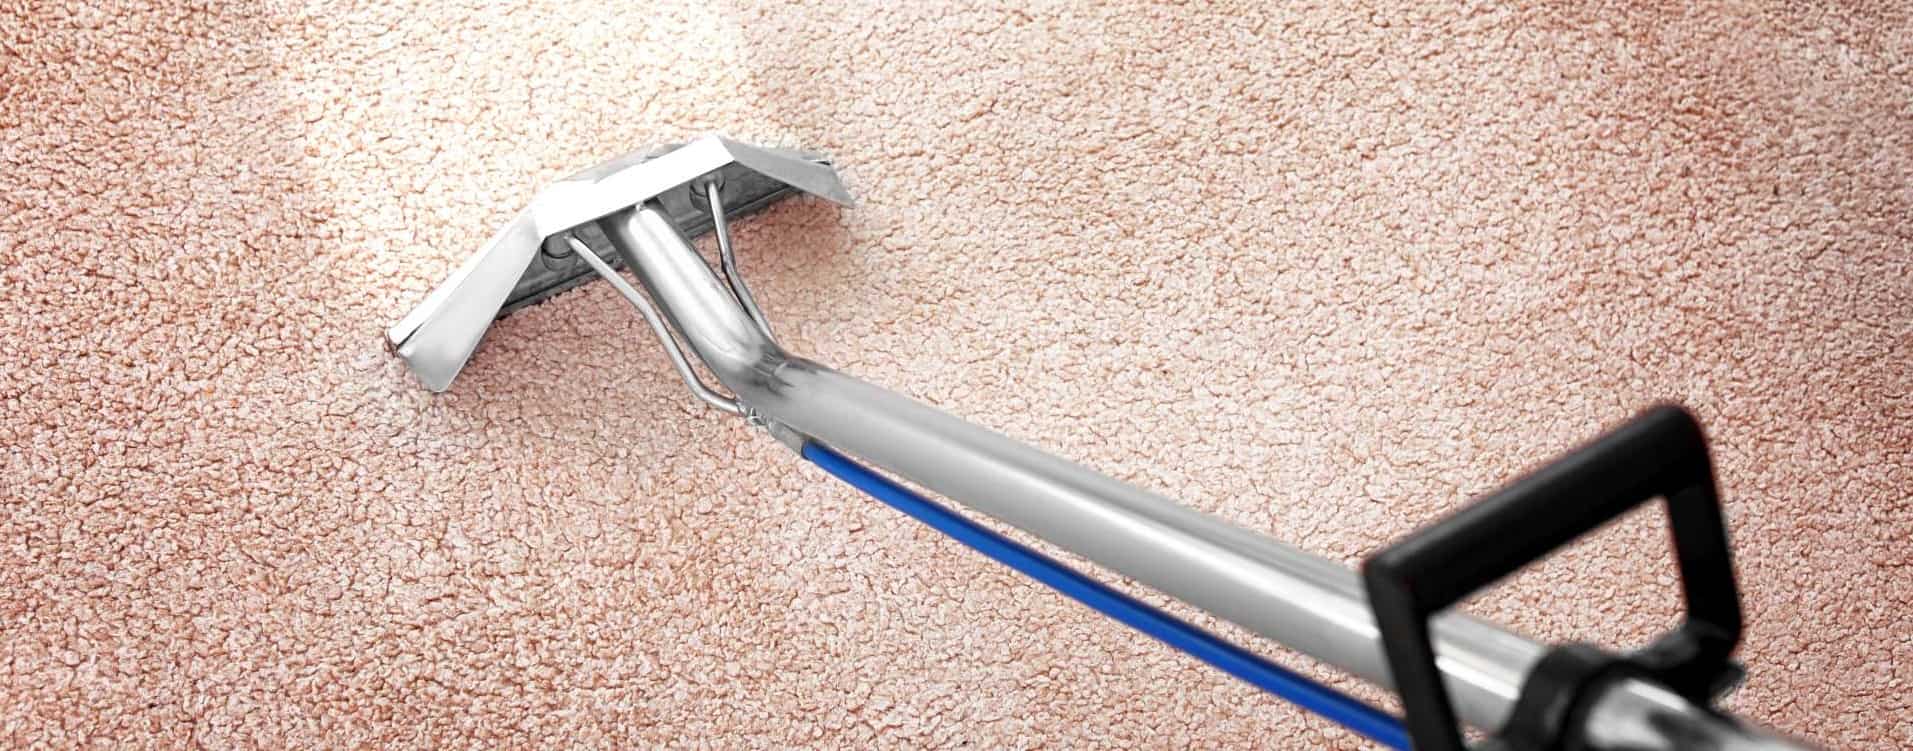 removing dirt from carpet with professional vacuum